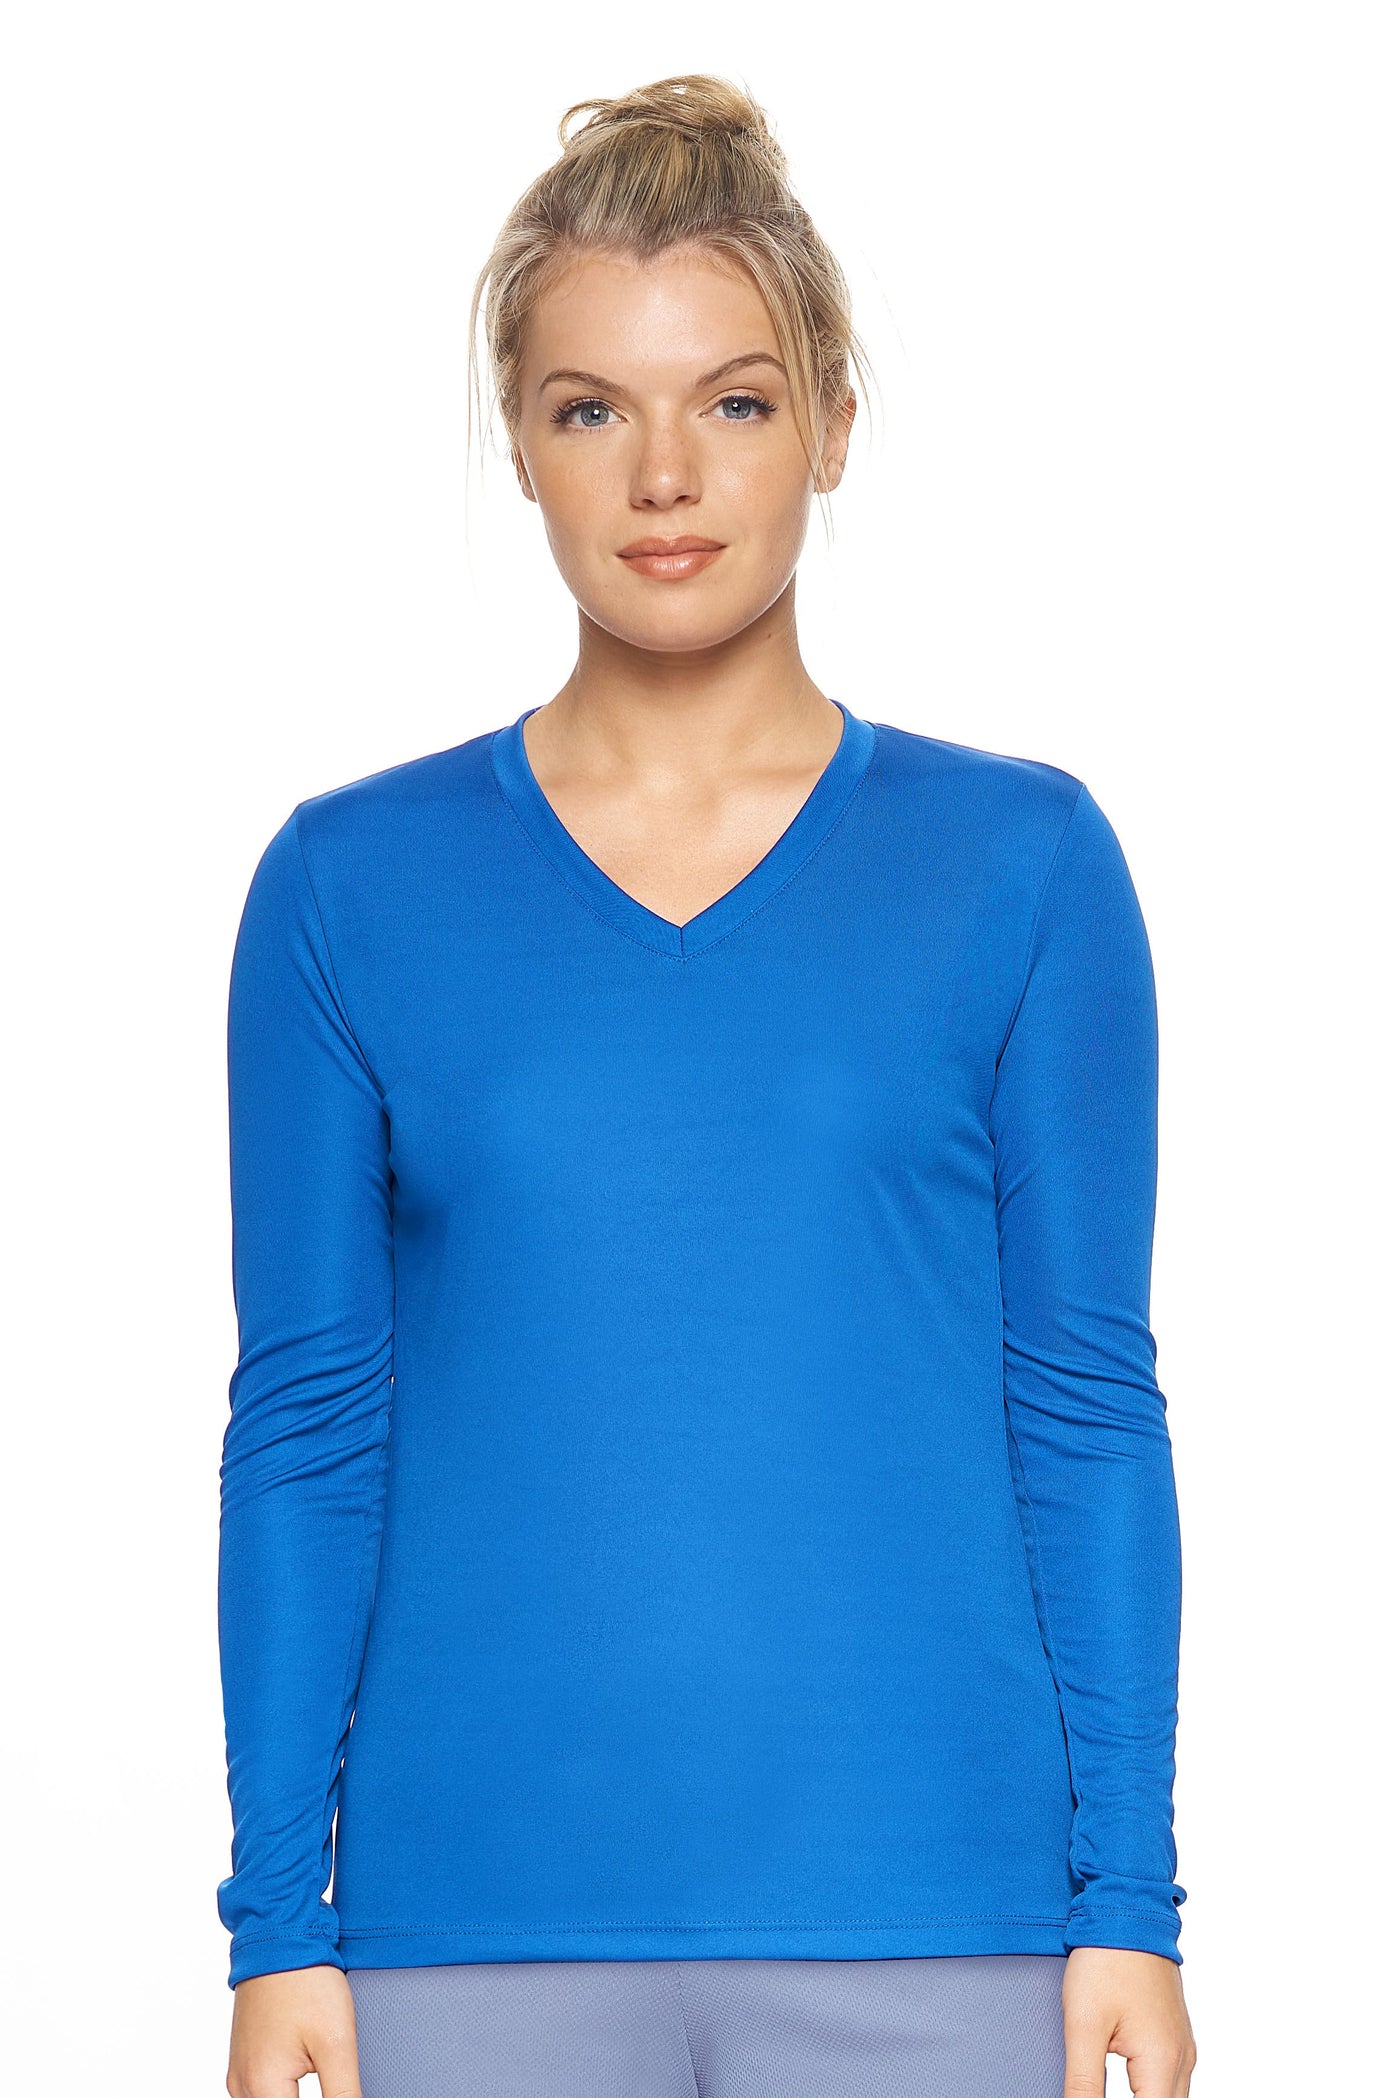 Expert Brand Retail Womens Activewear Womens Sportswear Made in USA Long Sleeve Tec Tee Runners Tee V Neck royal blue#color_royal-blue